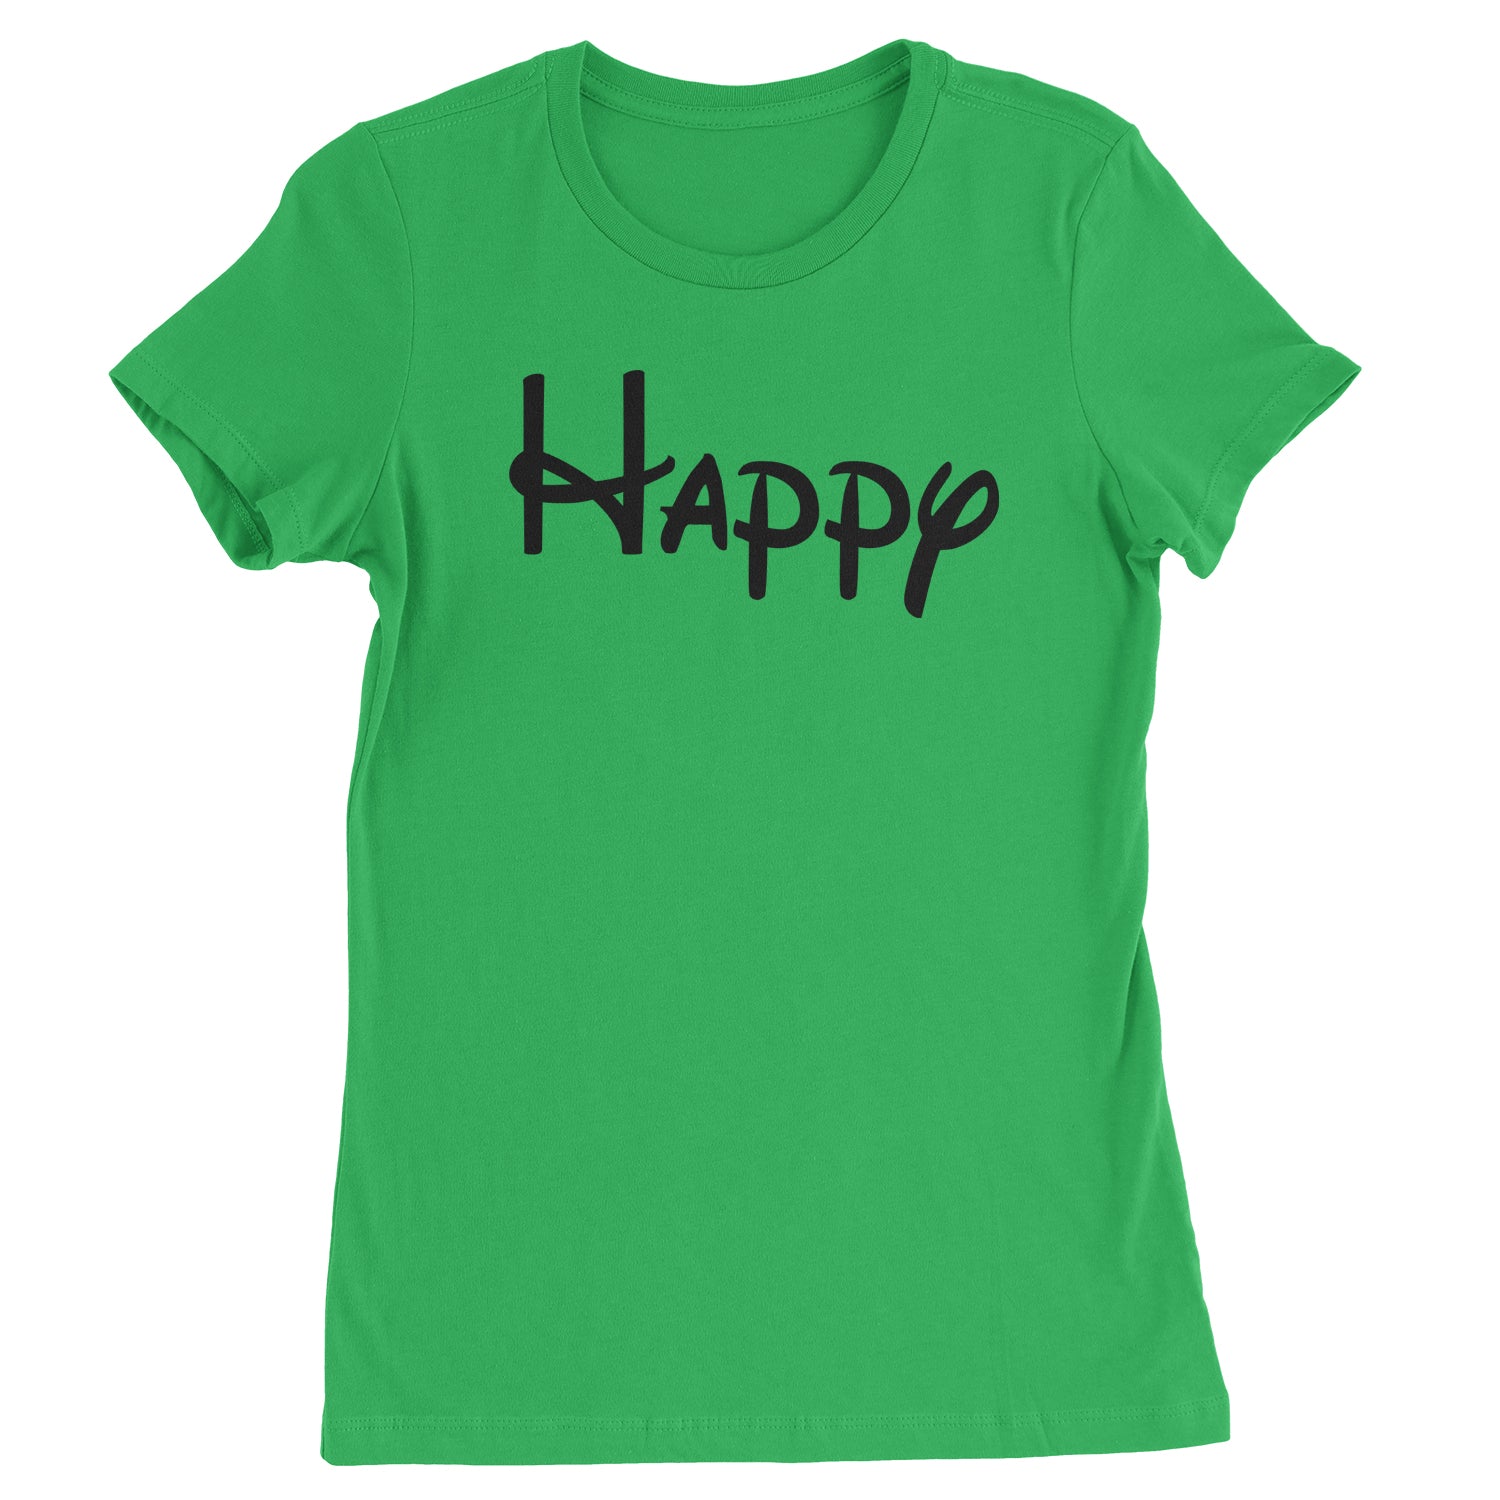 Happy - 7 Dwarfs Costume Womens T-shirt and, costume, dwarfs, group, halloween, matching, seven, snow, the, white by Expression Tees